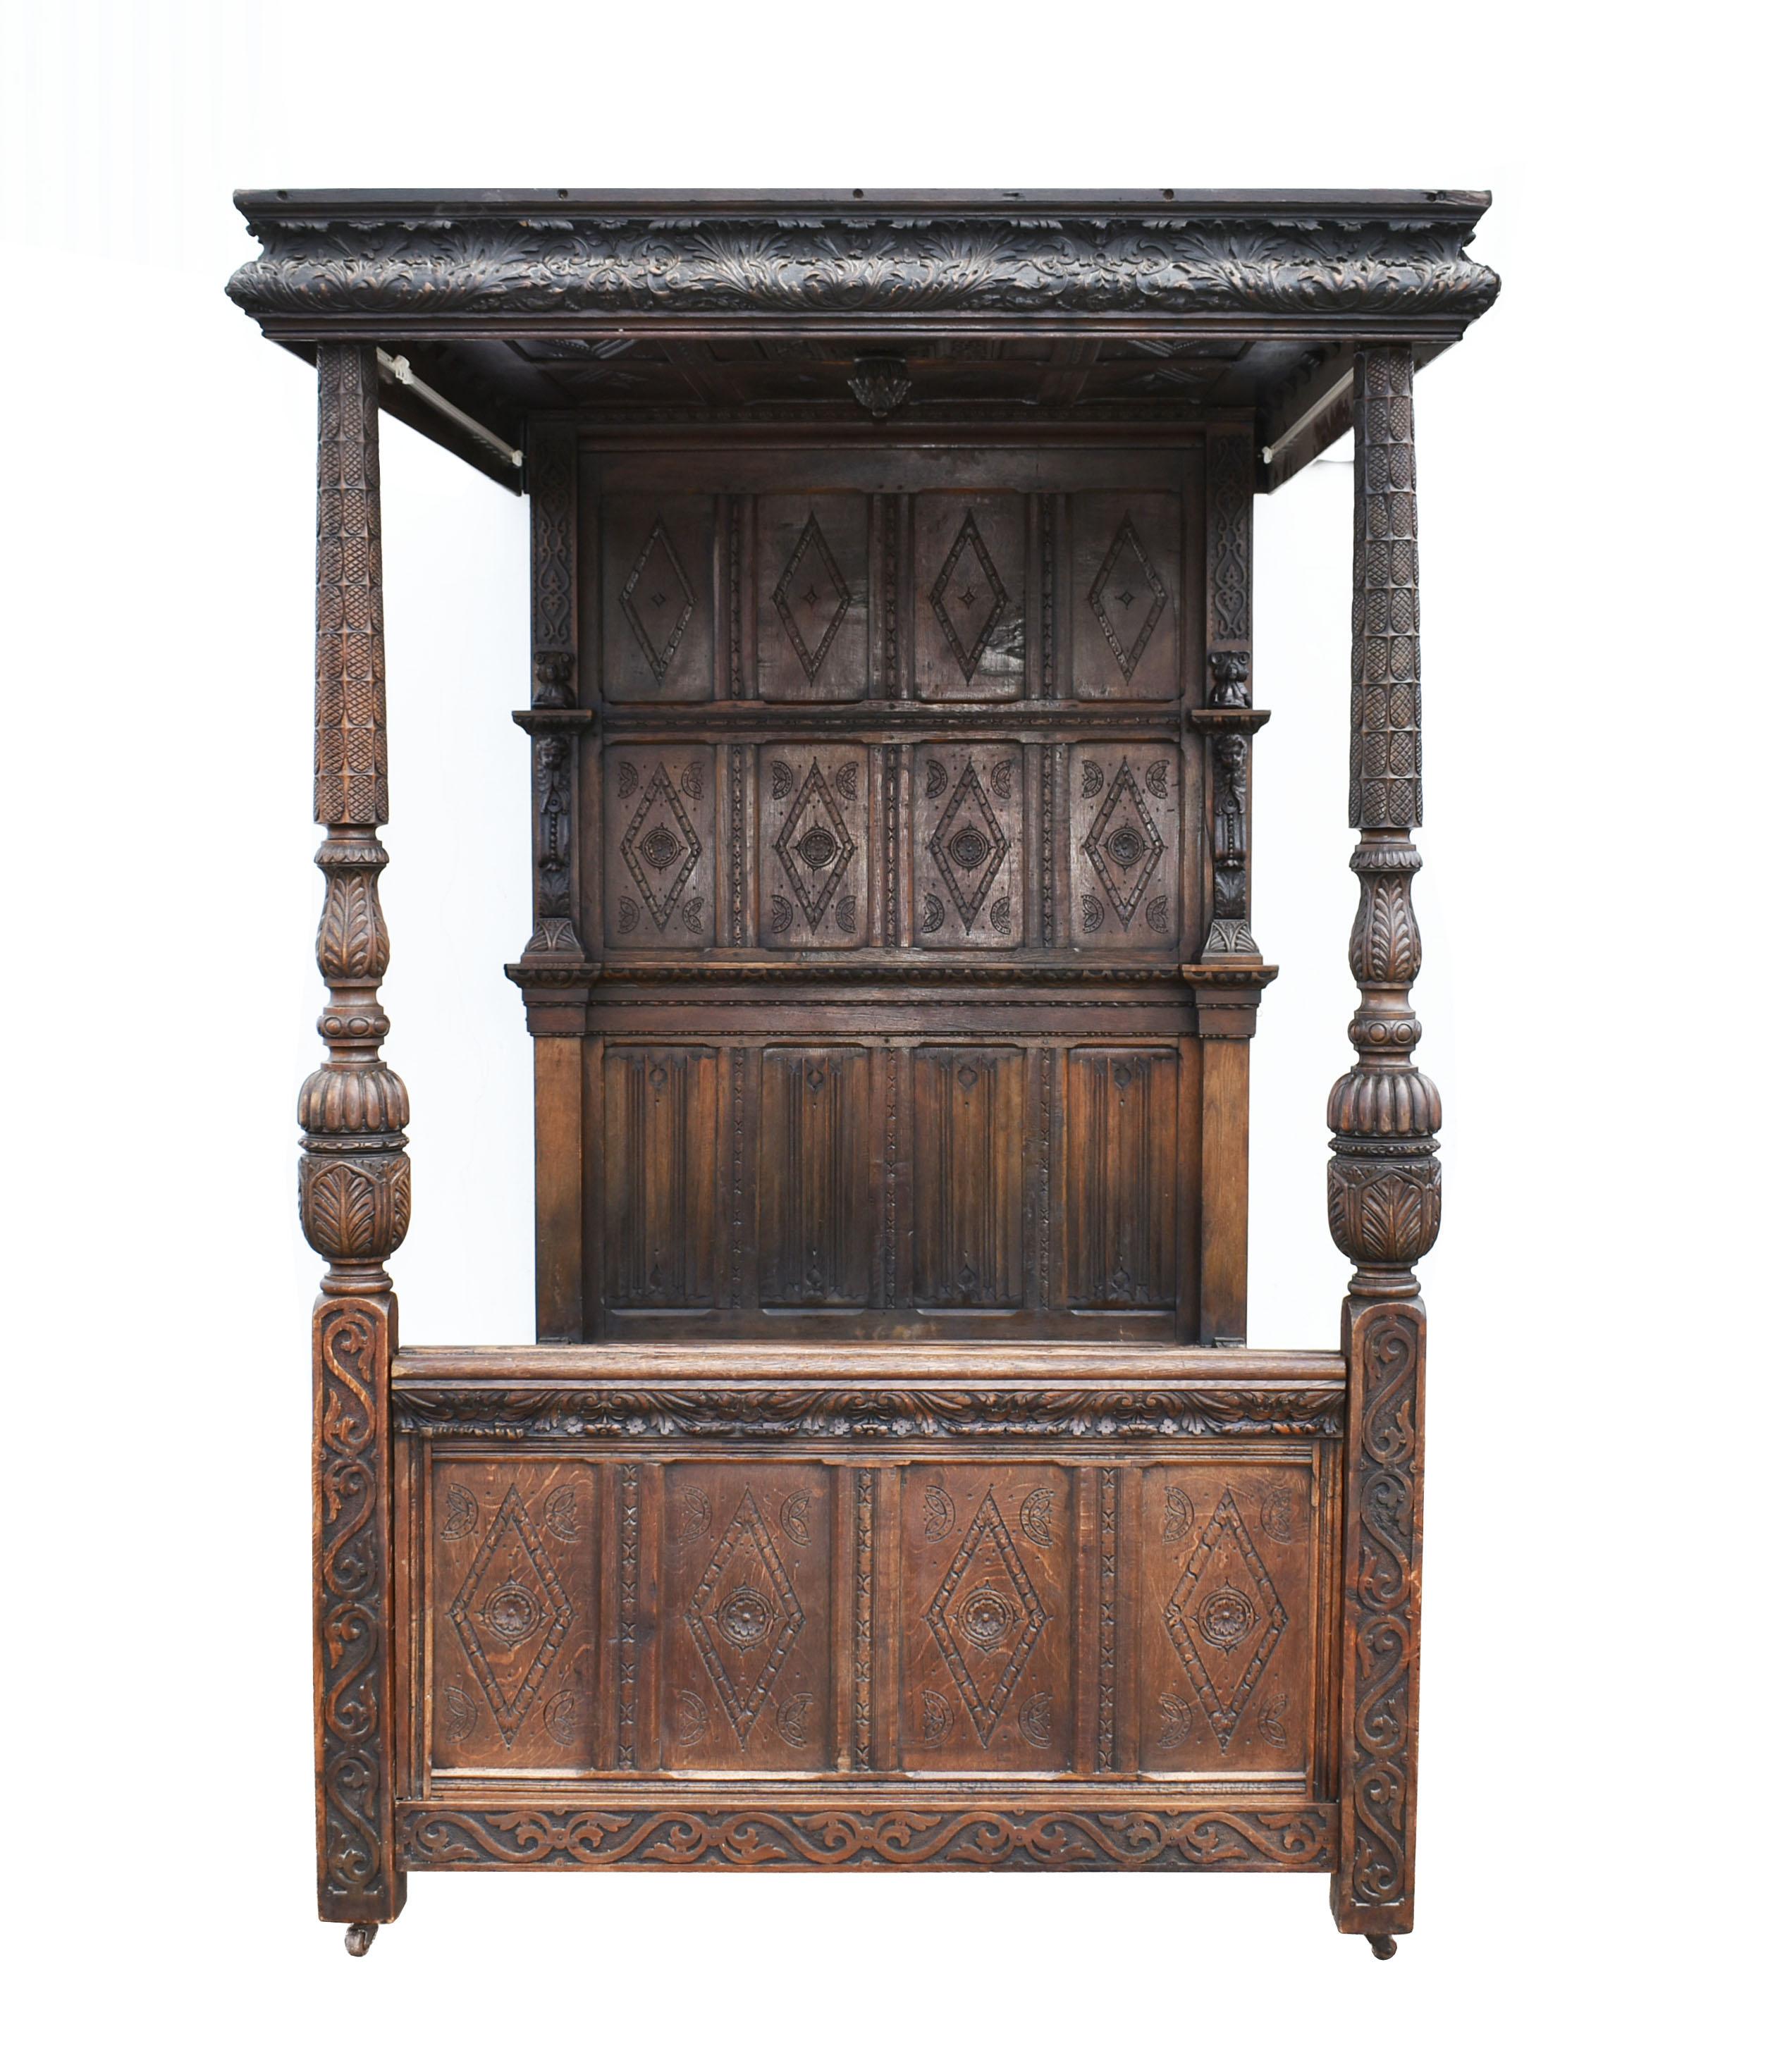 For sale is a fine example of an early 19th century Elizabethan style four-poster bed. Having a deep carved floral pattern around the entire canopy, supported by turned columns featuring bulbous cup and cover, gadrooned, stiff leaf carved supports,